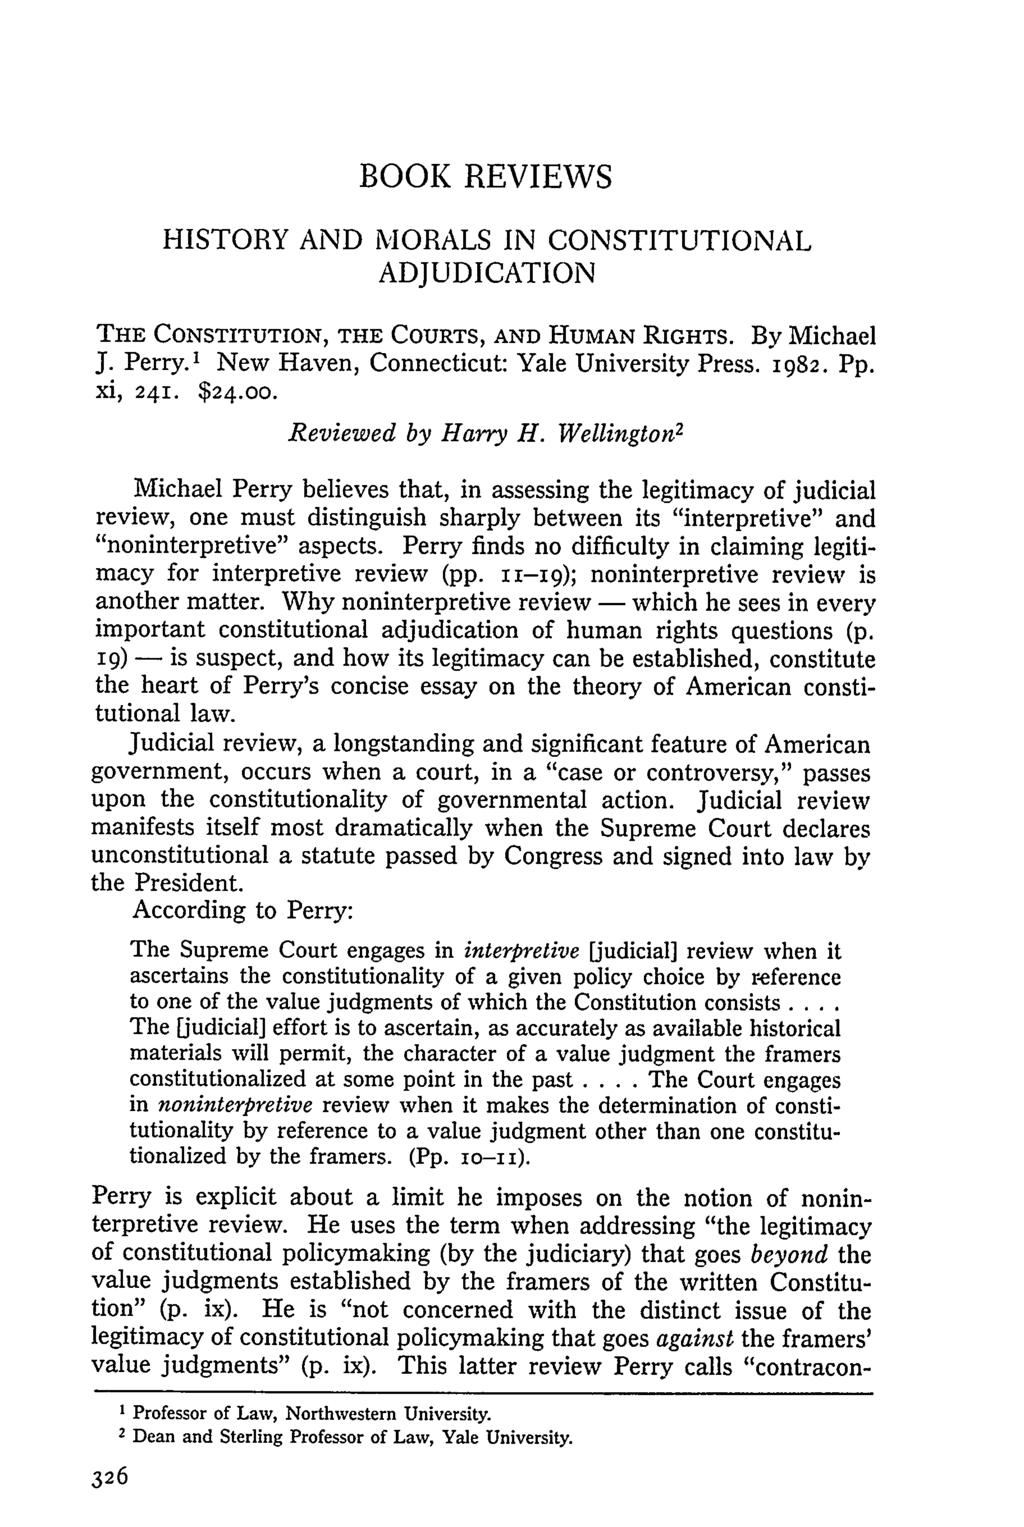 BOOK REVIEWS HISTORY AND MORALS IN CONSTITUTIONAL ADJUDICATION THE CONSTITUTION, THE COURTS, AND HUMAN RIGHTS. By Michael J. Perry. 1 New Haven, Connecticut: Yale University Press. 1982. Pp. Xi, 241.